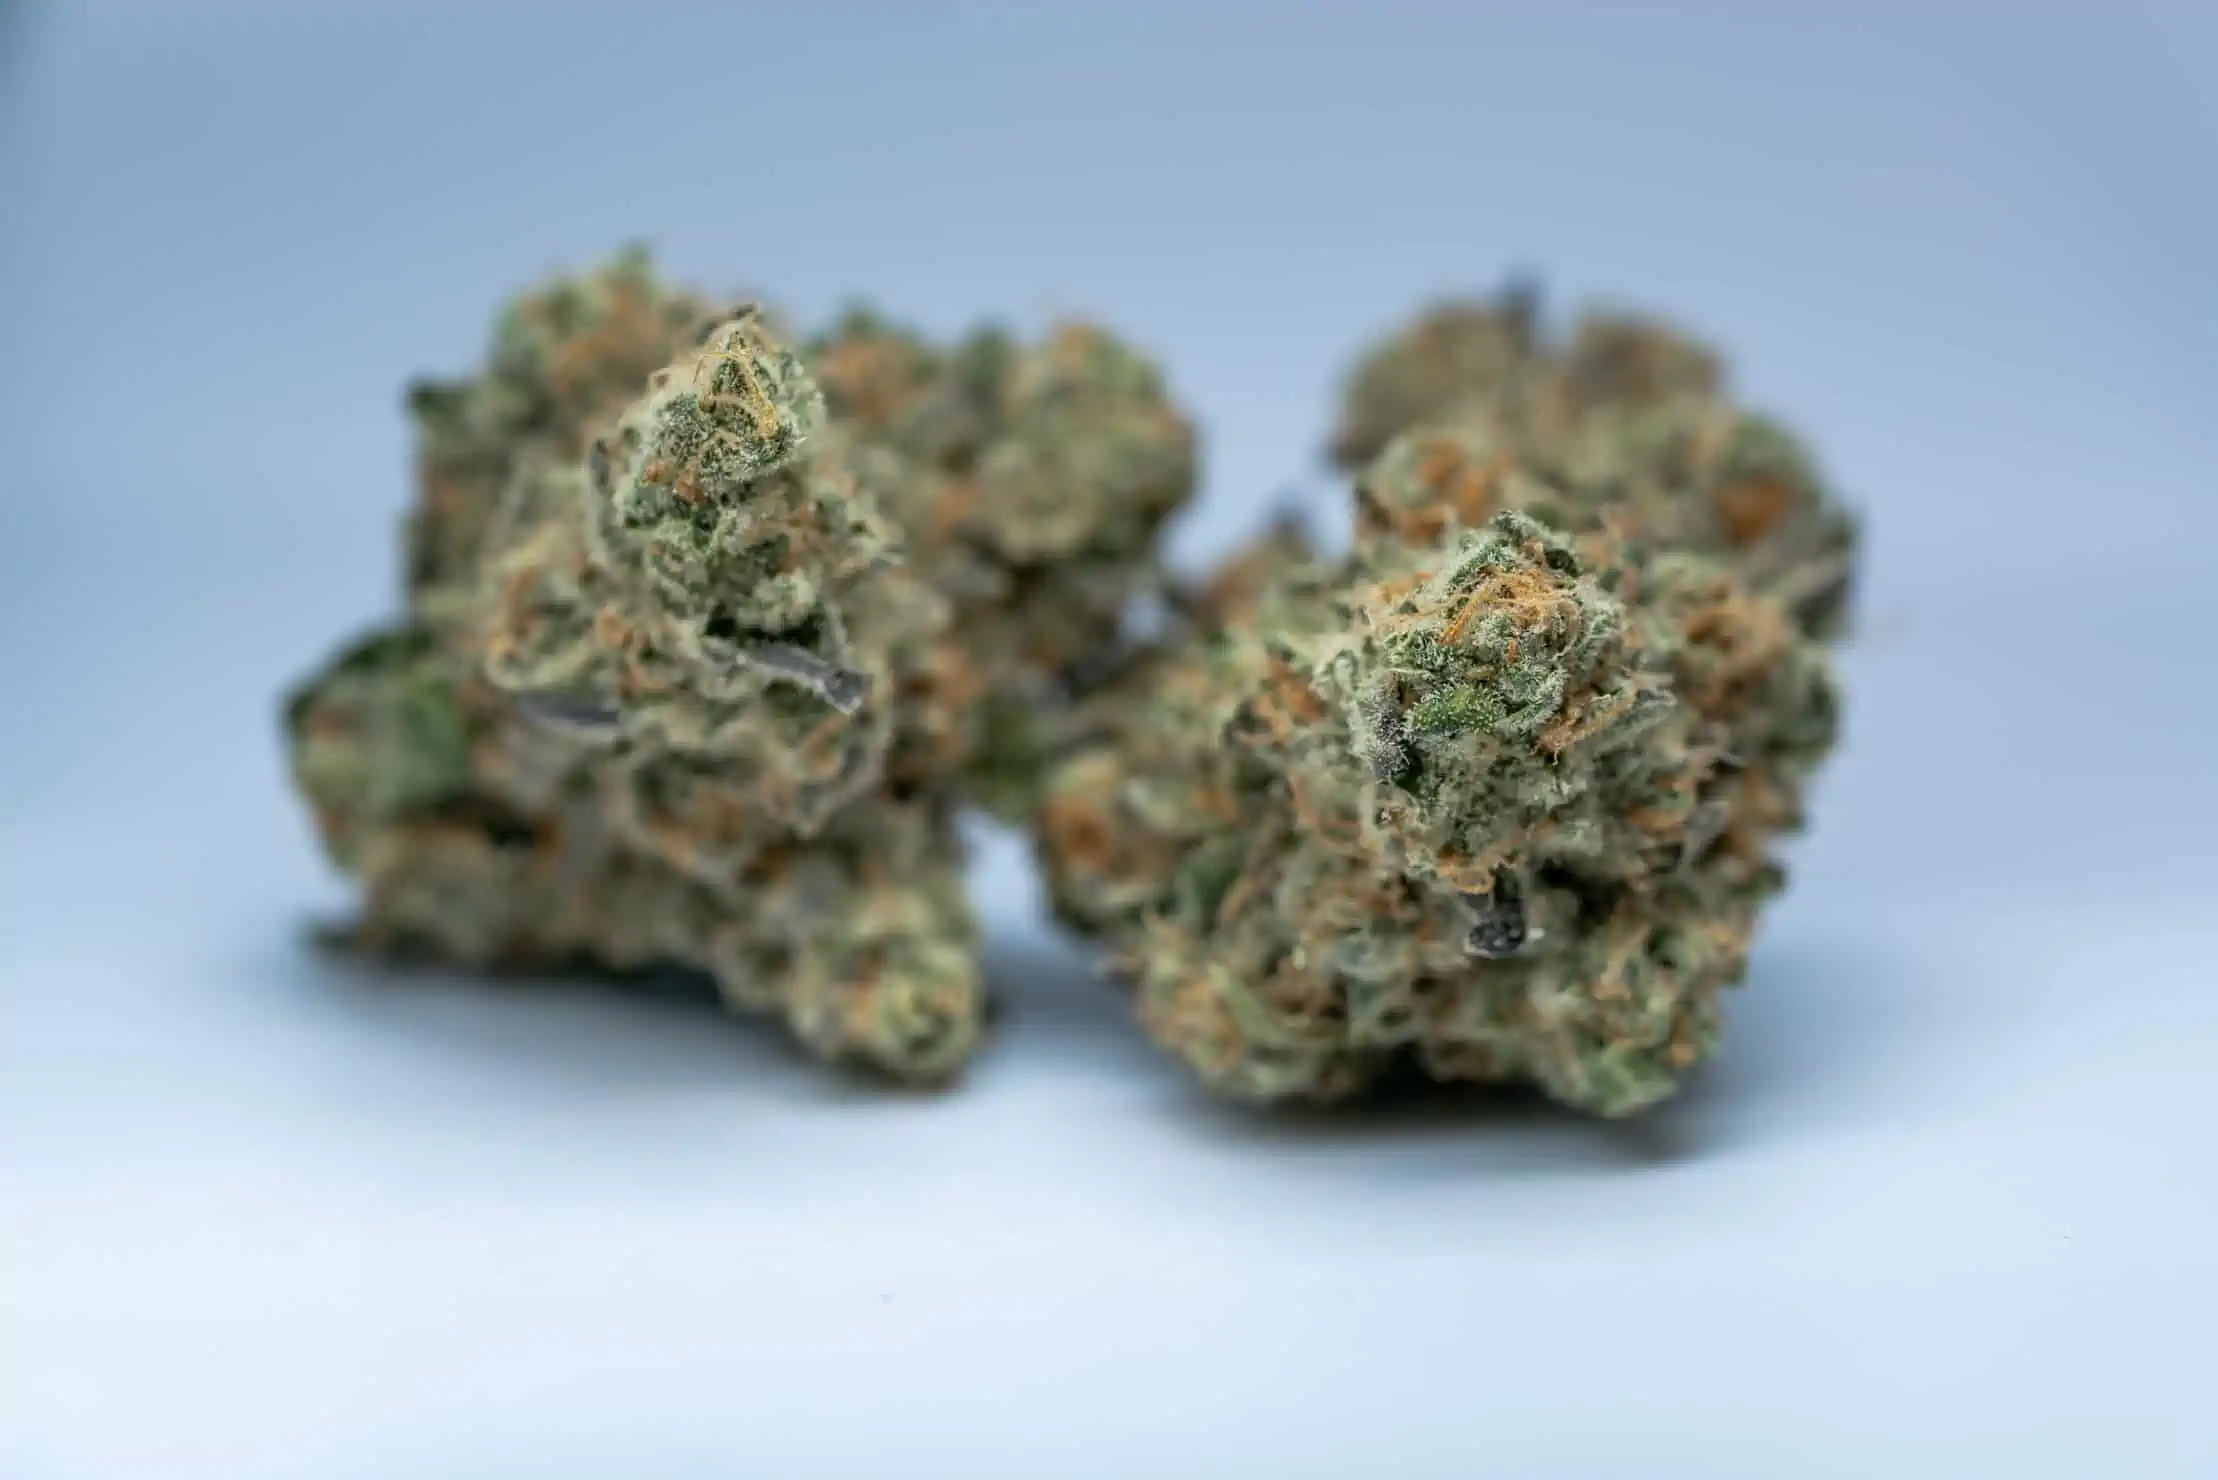 Durban Poison Weed Strain Review & Information